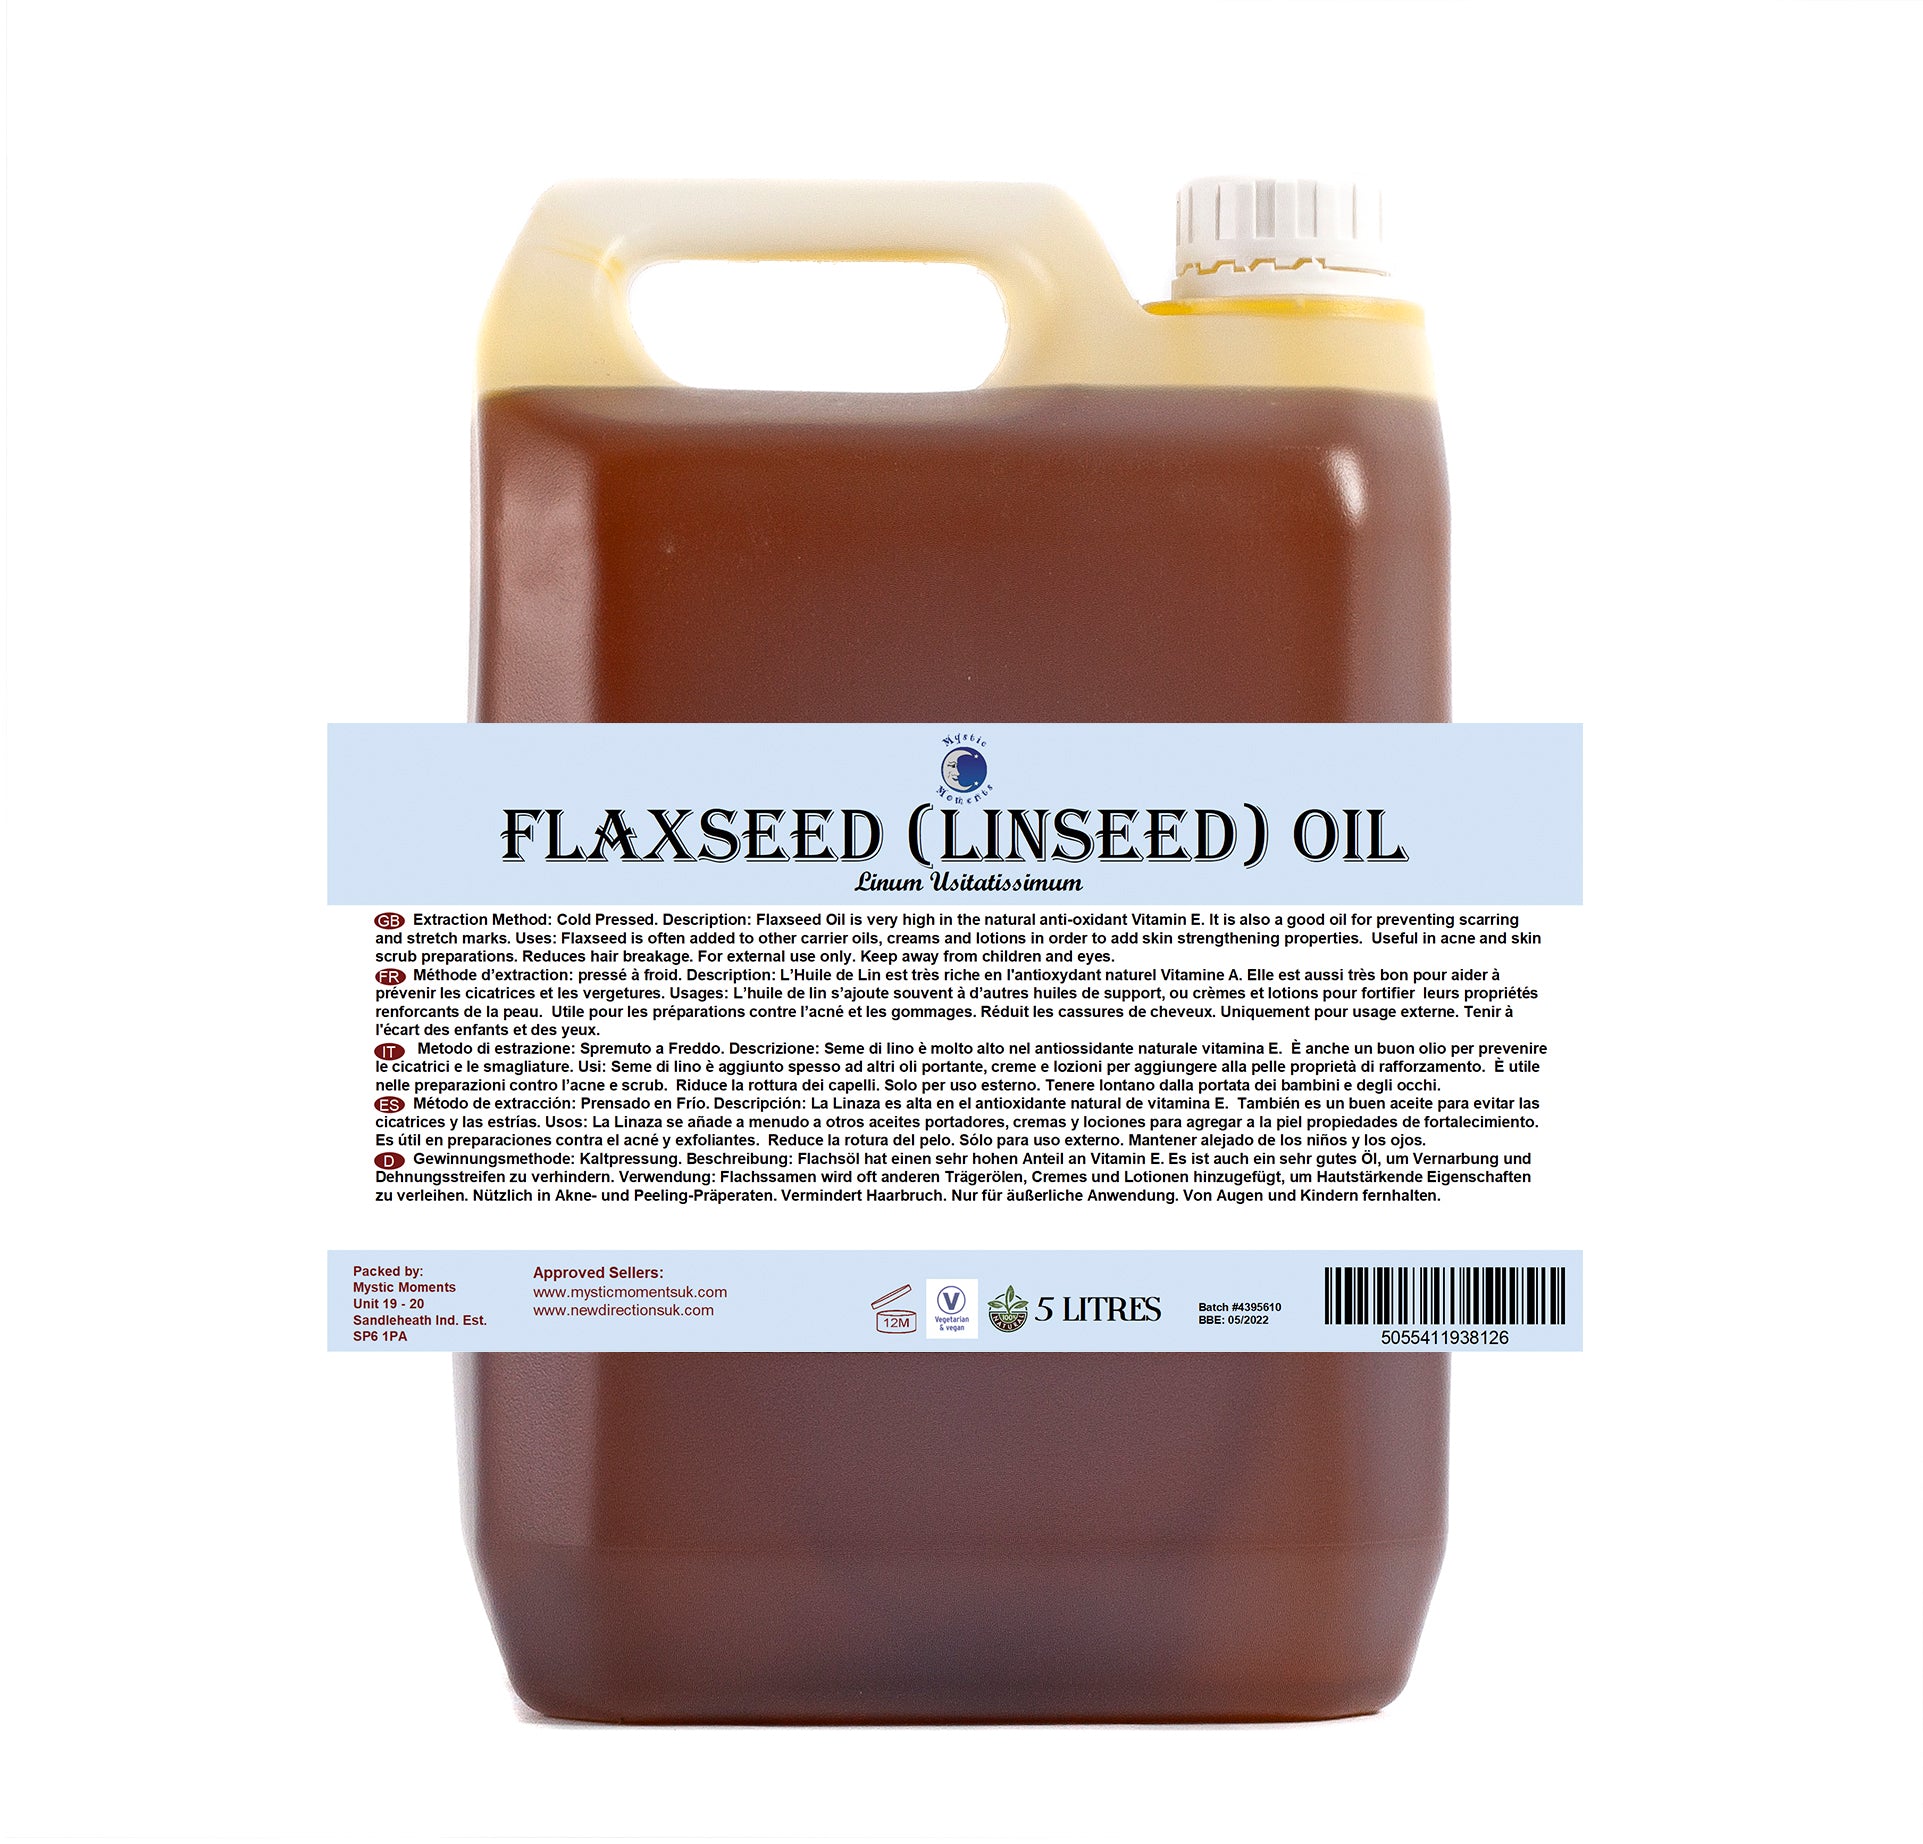 Flaxseed (Linseed) Carrier Oil